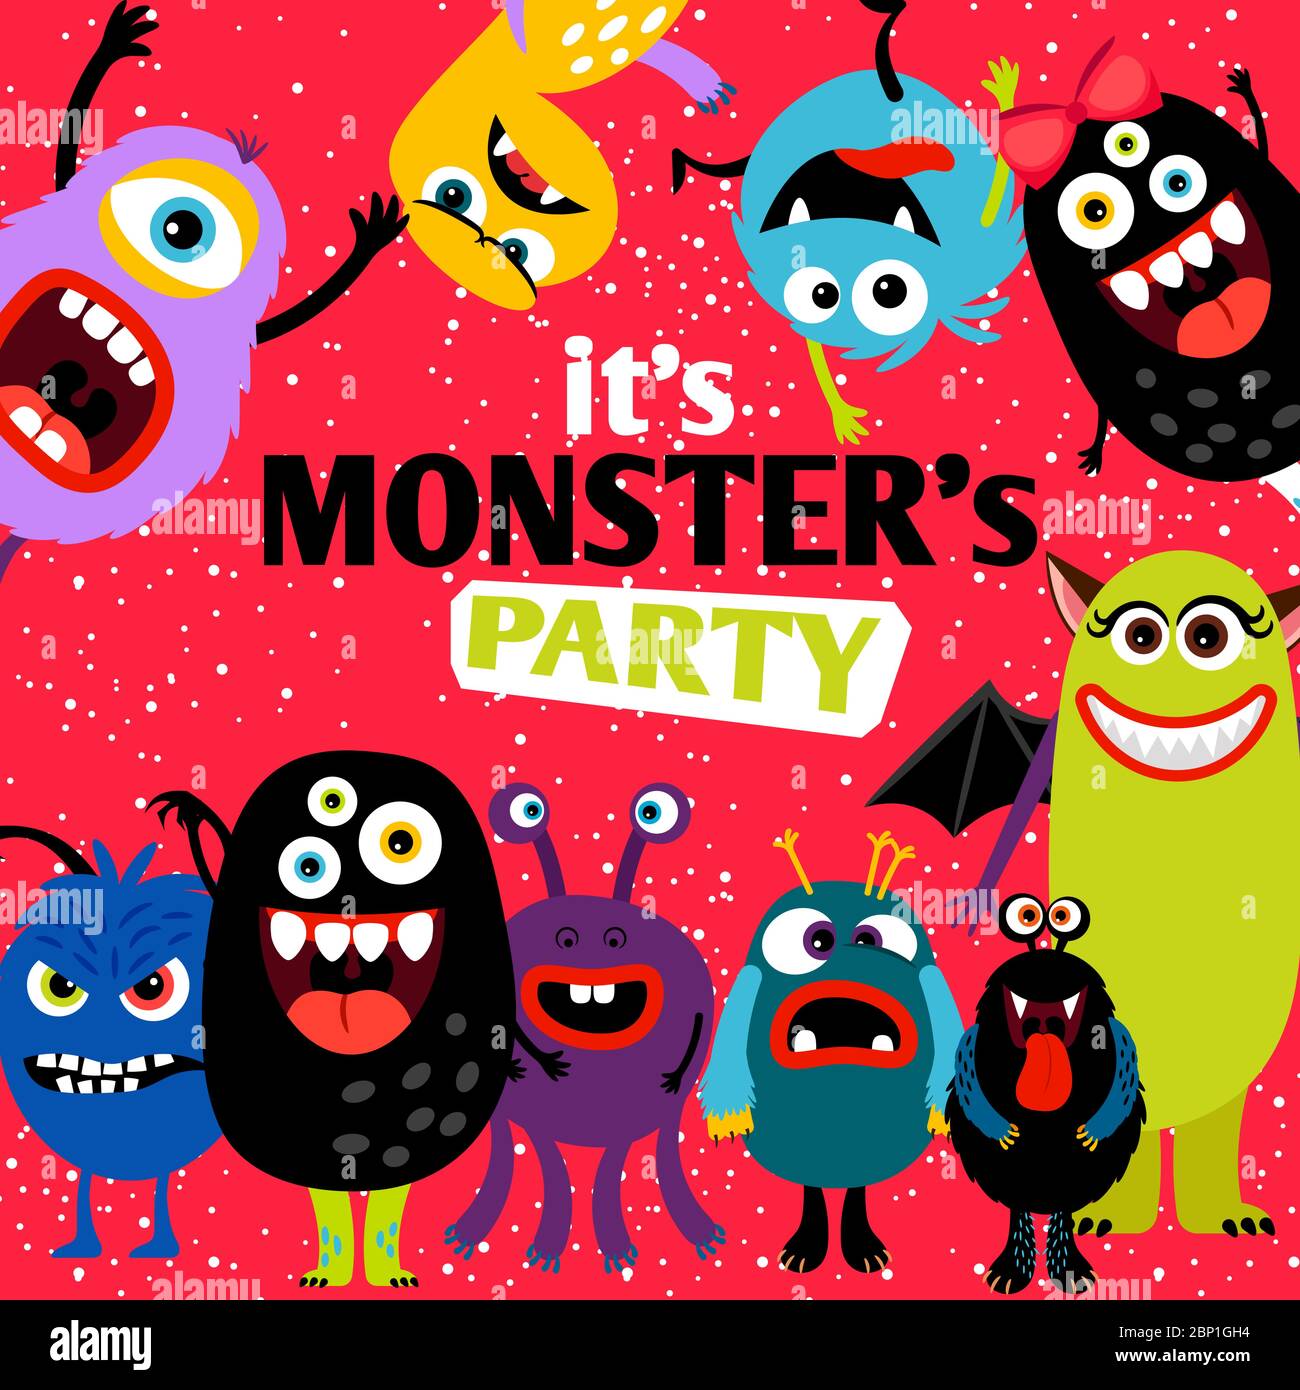 Its a party monster banner vector illustration Stock Vector Image & Art ...